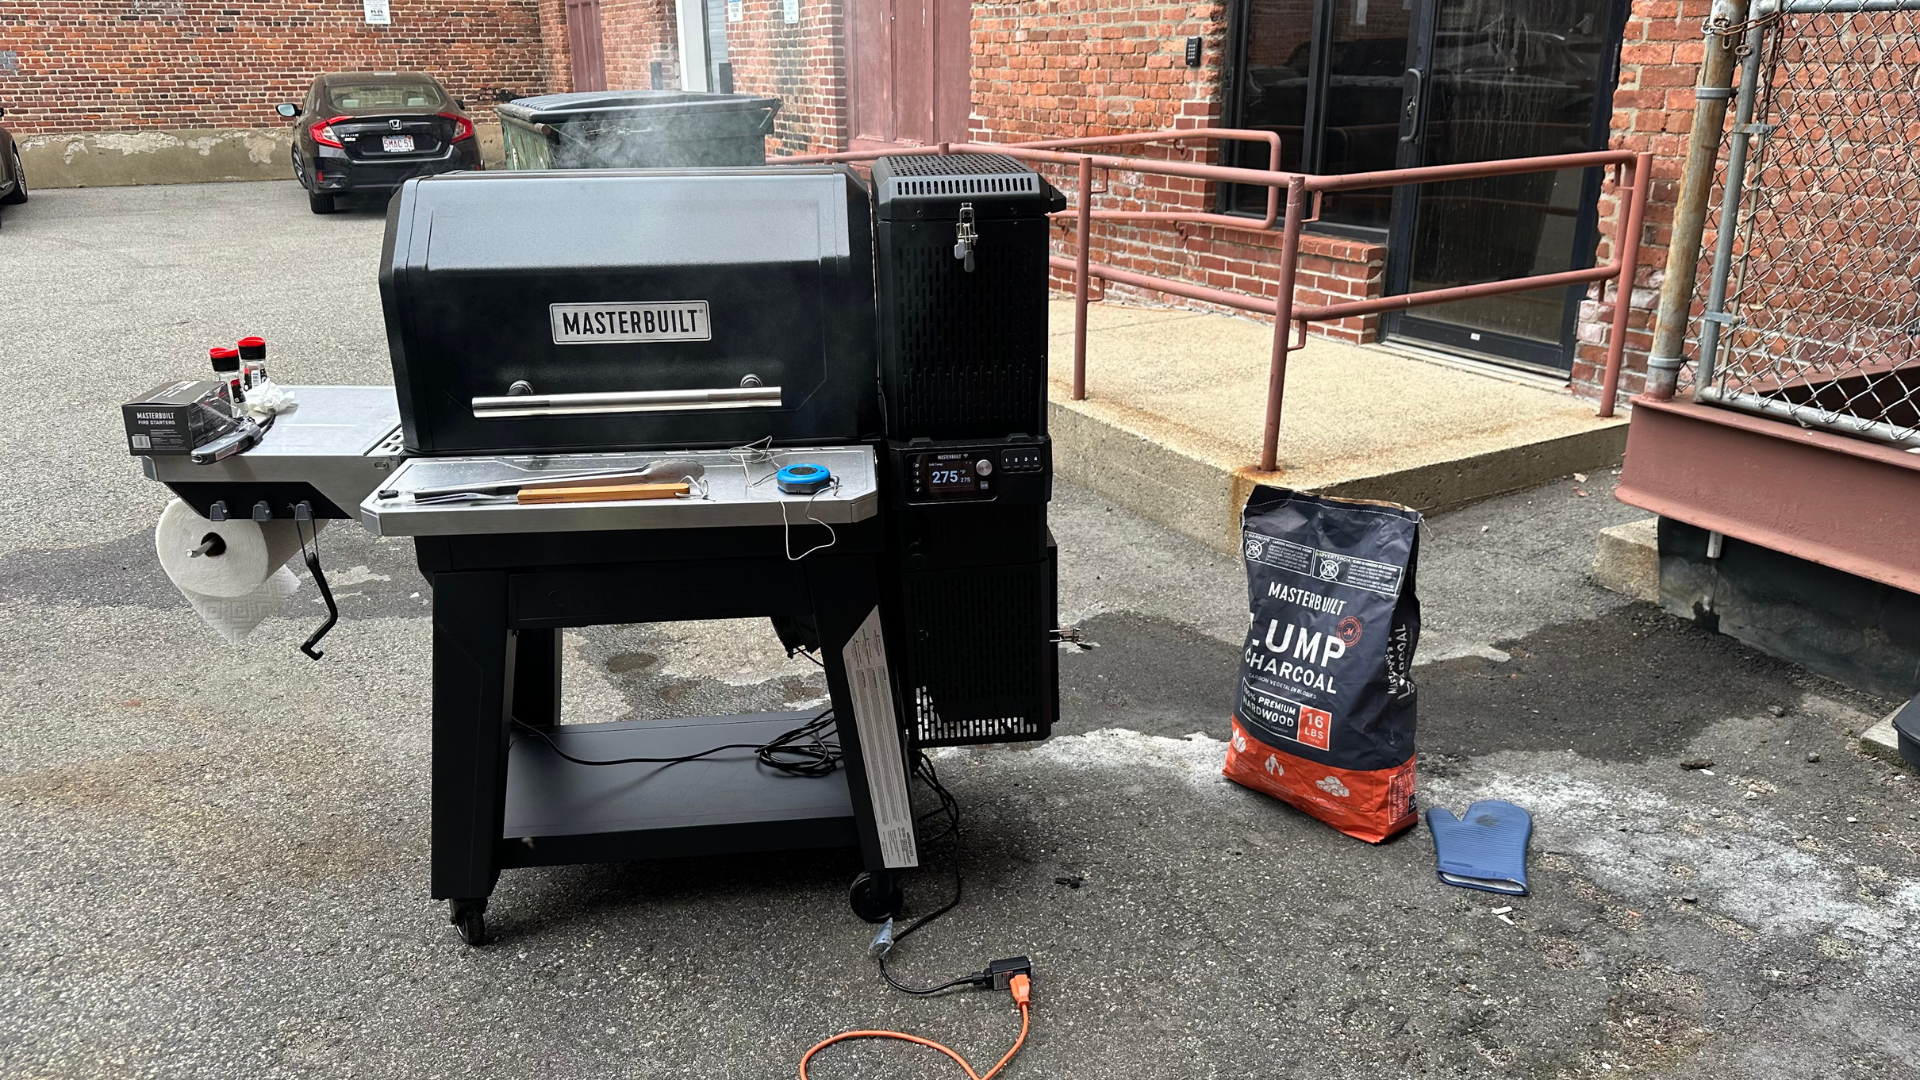 This smart, digital charcoal grill doubles as a smoker—but it comes with downsides